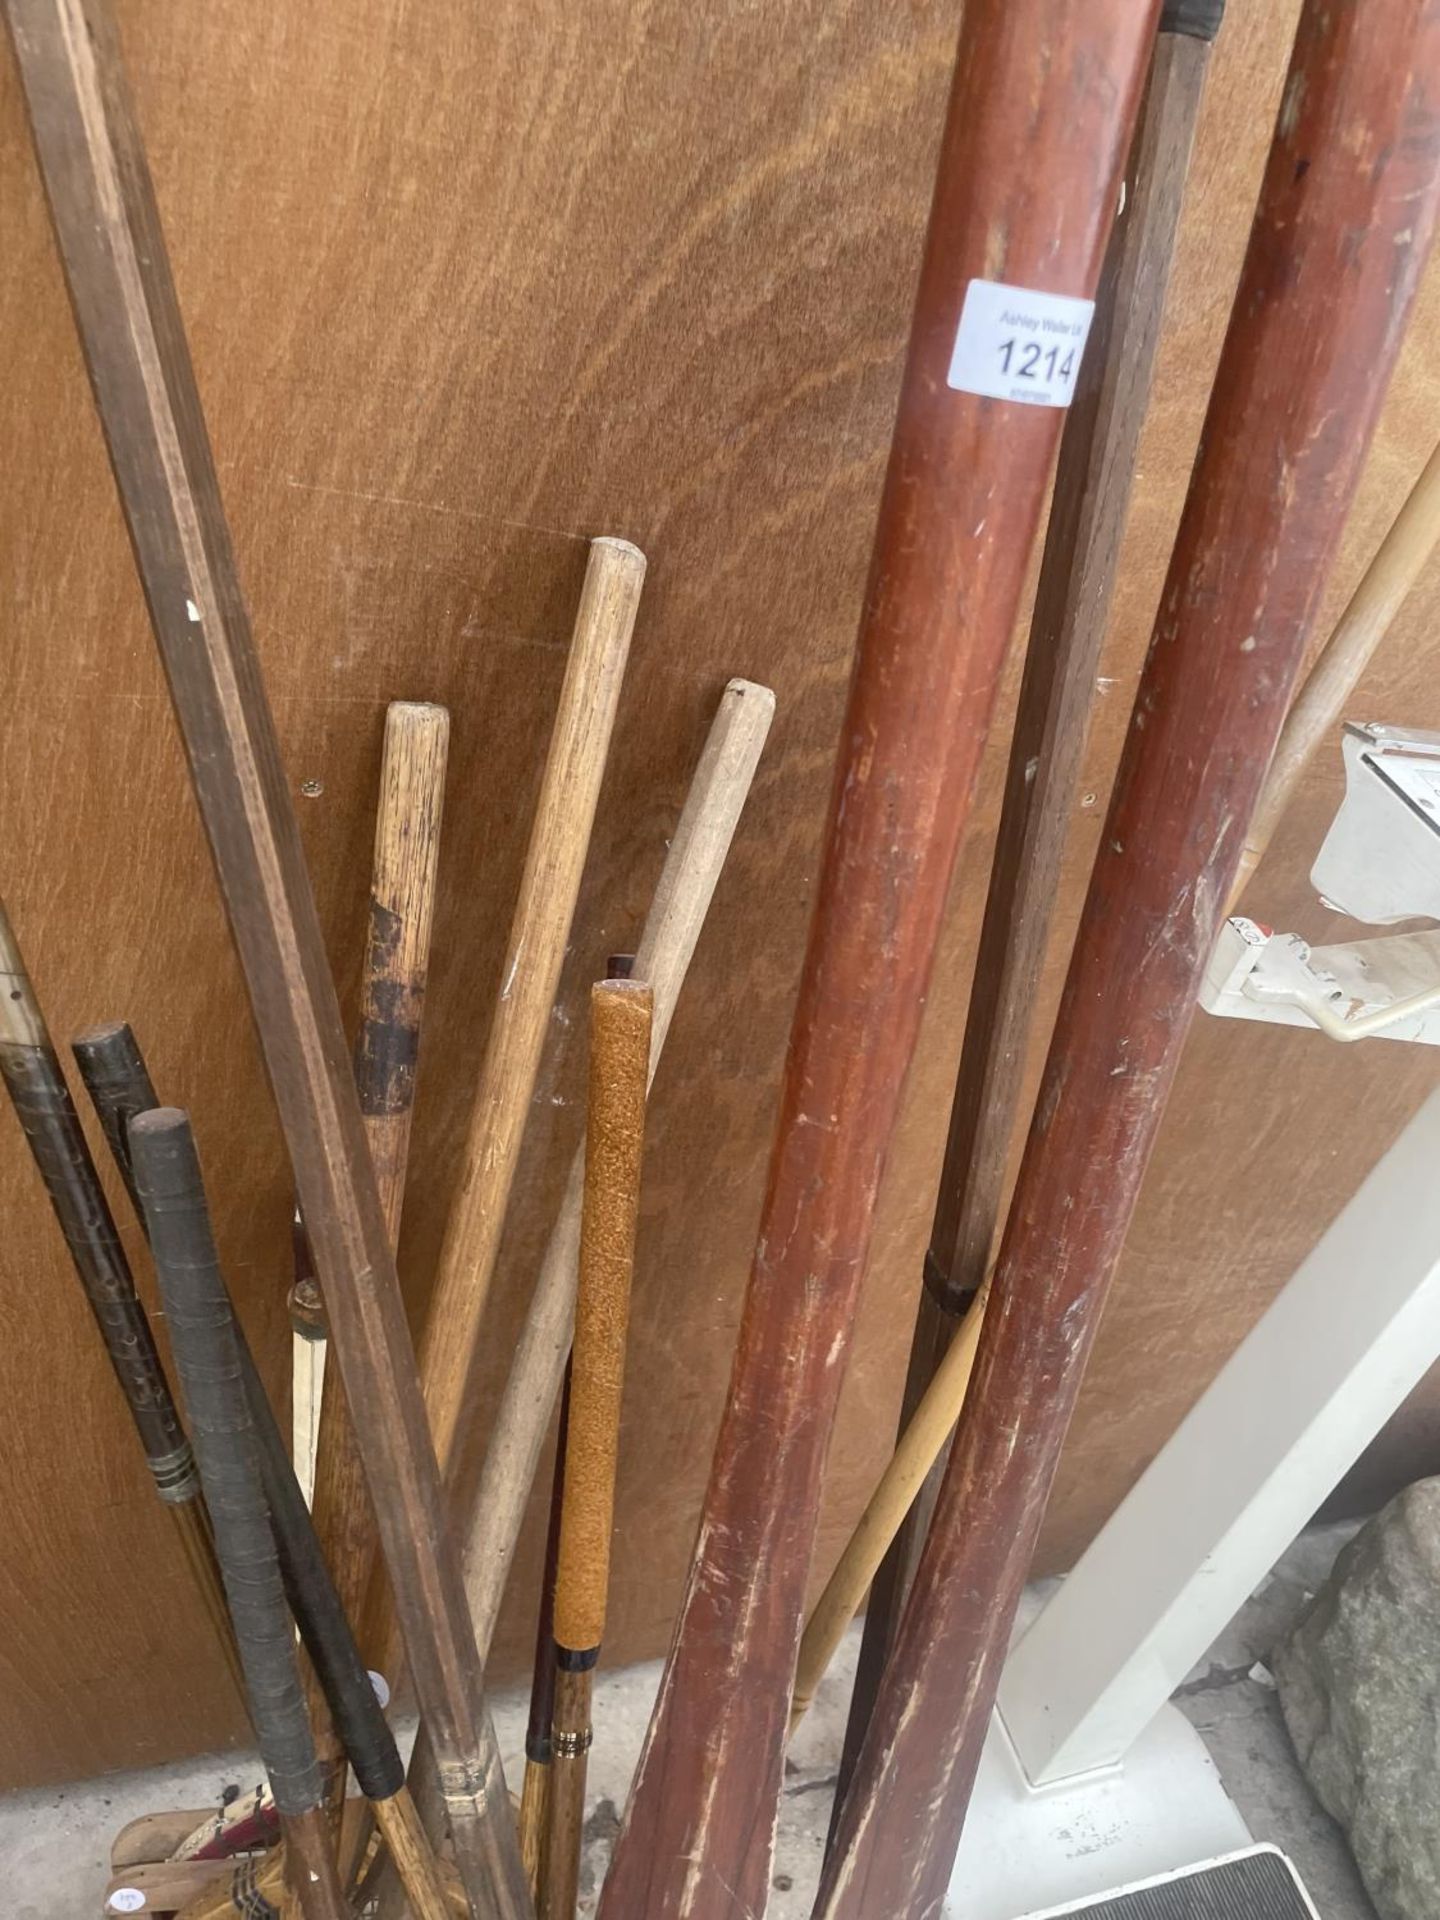 A LARGE QUANTITY OF VINTAGE SPORTS EQUIPMENT * LACROSSE, OARS, GOLF ETC - Image 5 of 5